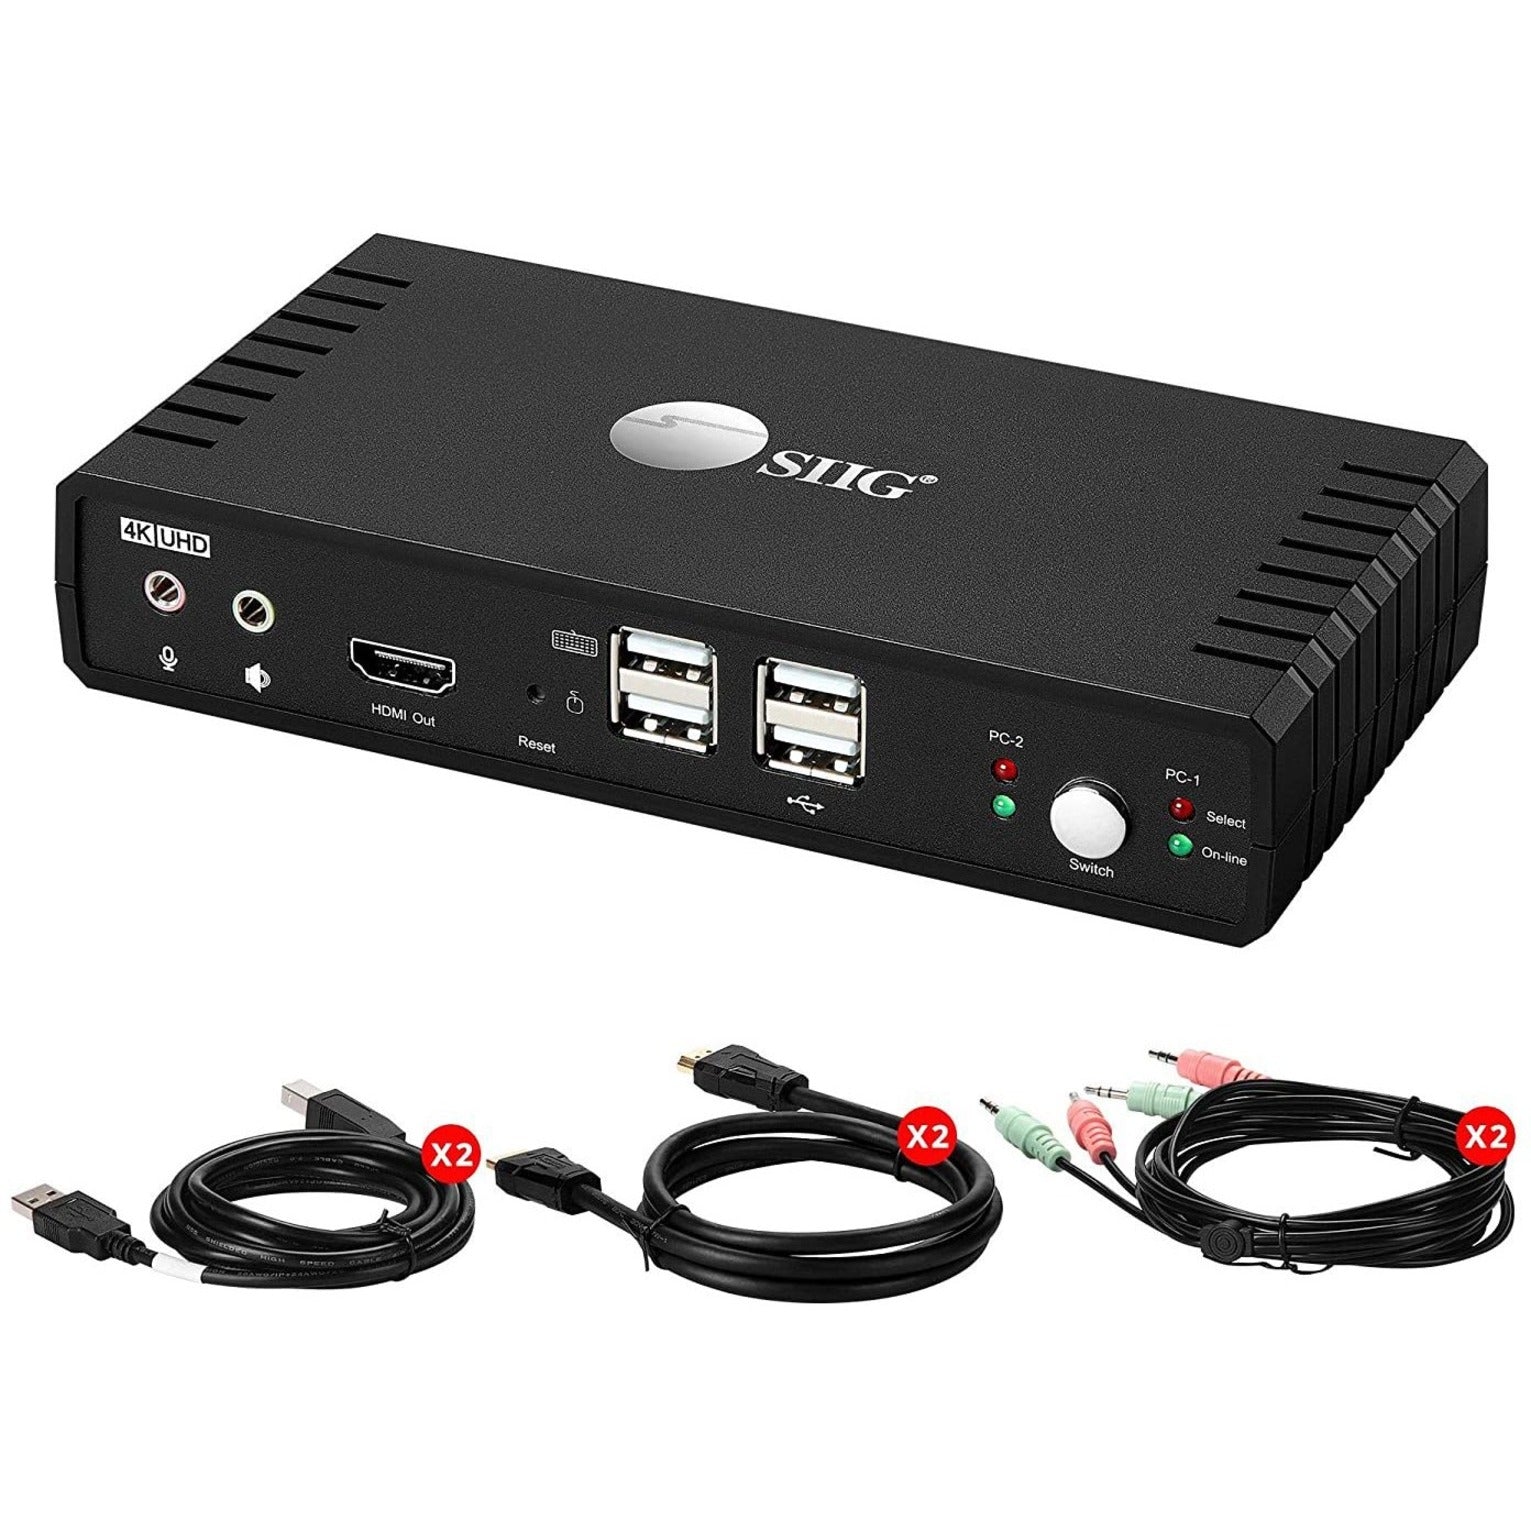 SIIG CE-KV0811-S1 2-Port HDMI2.0 Video Console KVM Switch with USB2.0, 3840 x 2160 Resolution, 2-Year Warranty